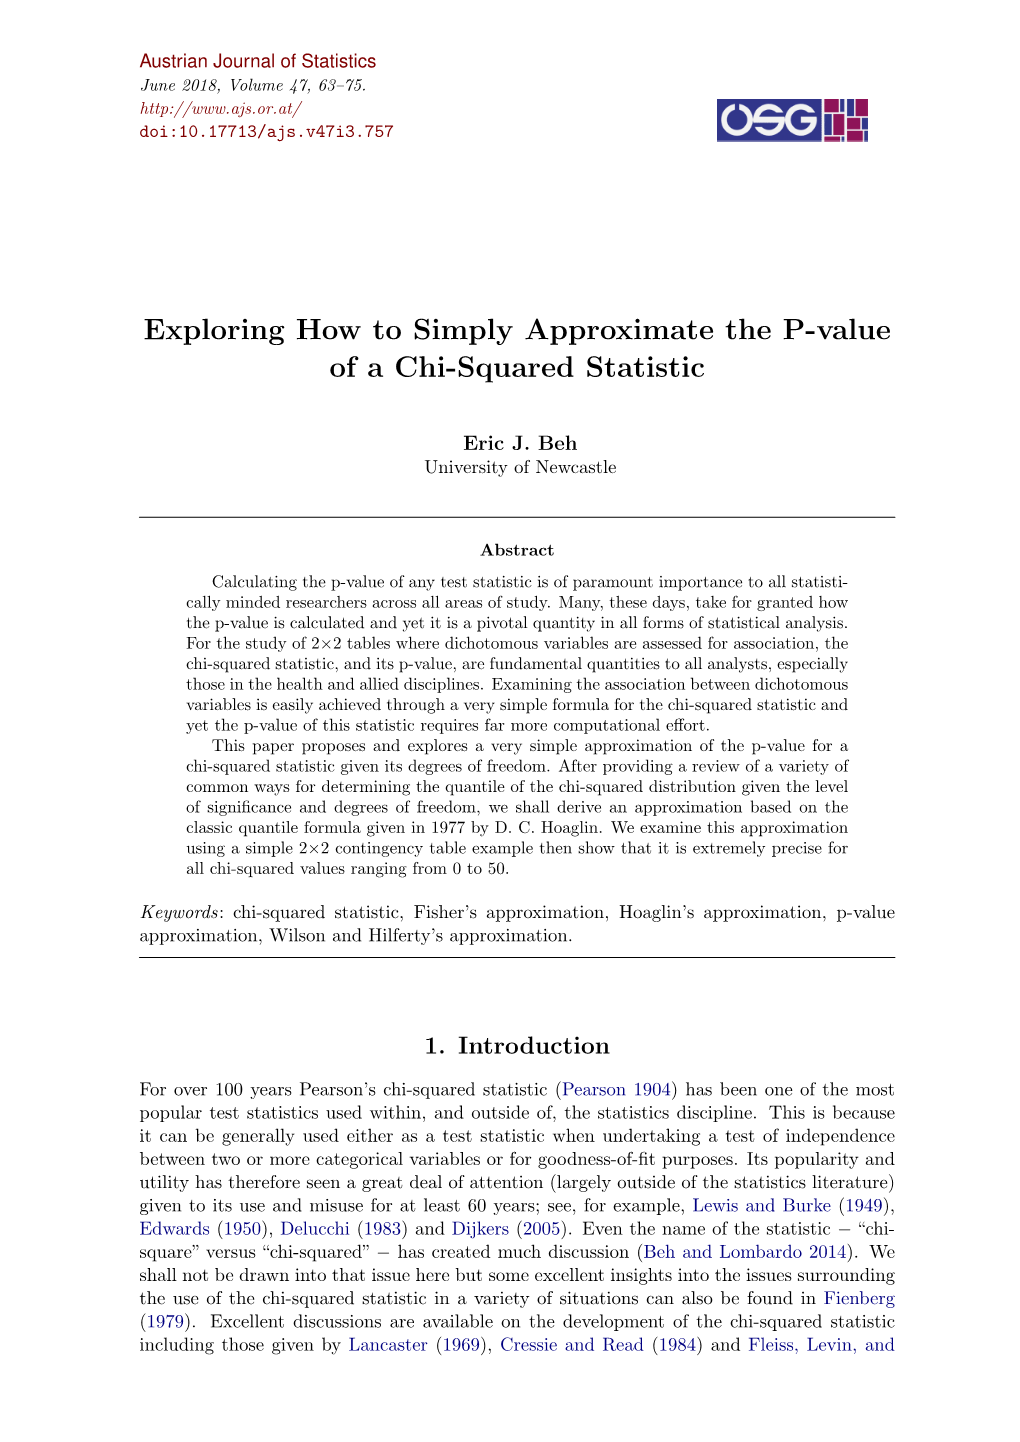 Simply Approximating the Chi-Squared Statistic's P-Value